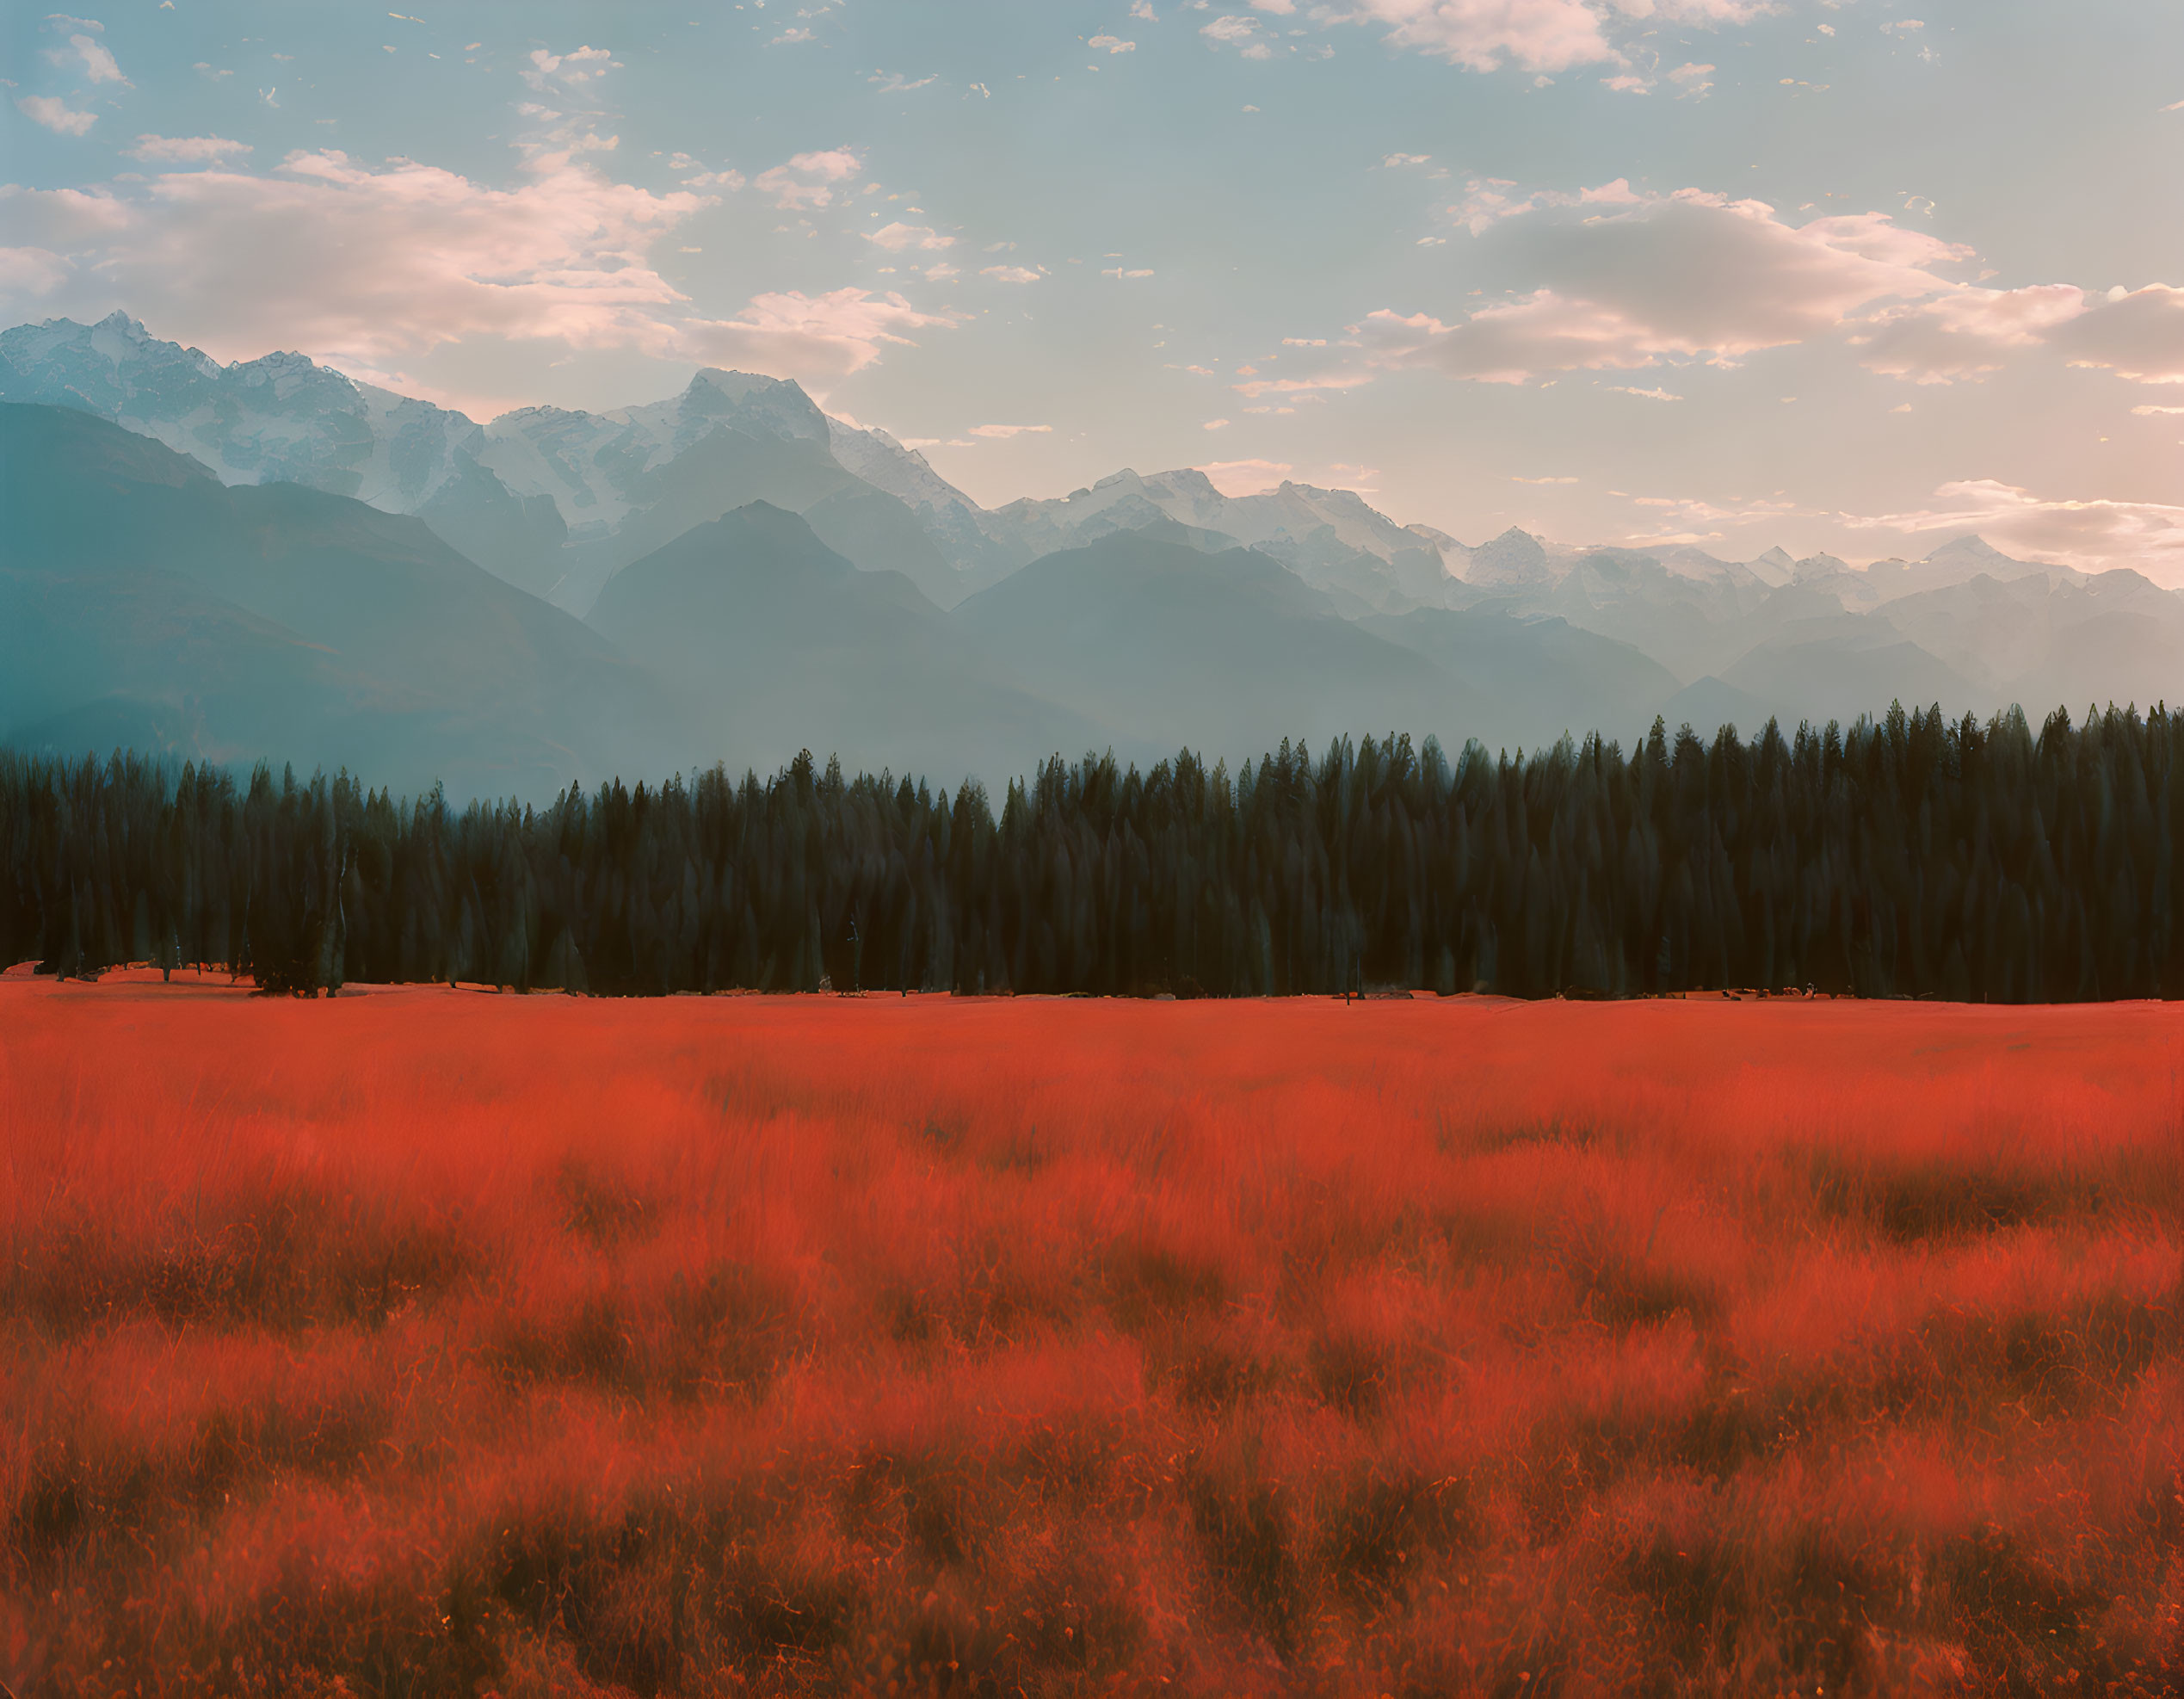 Vivid Red Meadow with Forest, Dusky Sky, and Snow-Capped Peaks